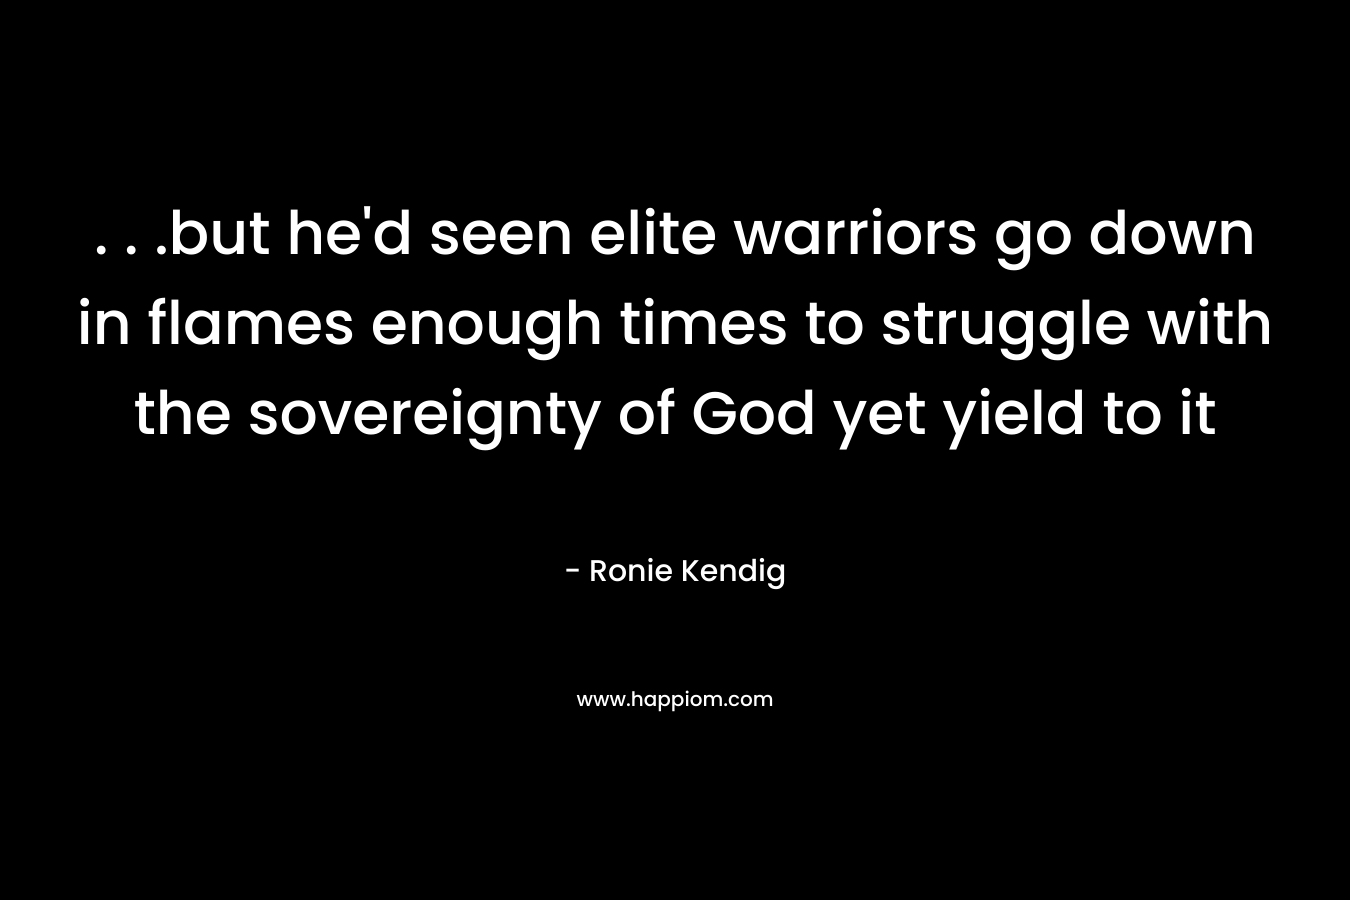 . . .but he'd seen elite warriors go down in flames enough times to struggle with the sovereignty of God yet yield to it